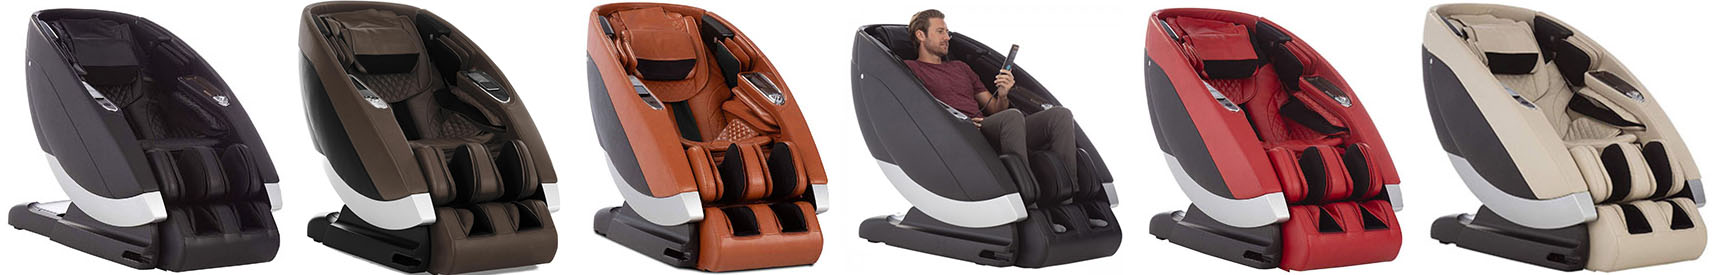 Super Novo Zero Gravity 4d S And L Track Massage Chair Recliner By Human Touch